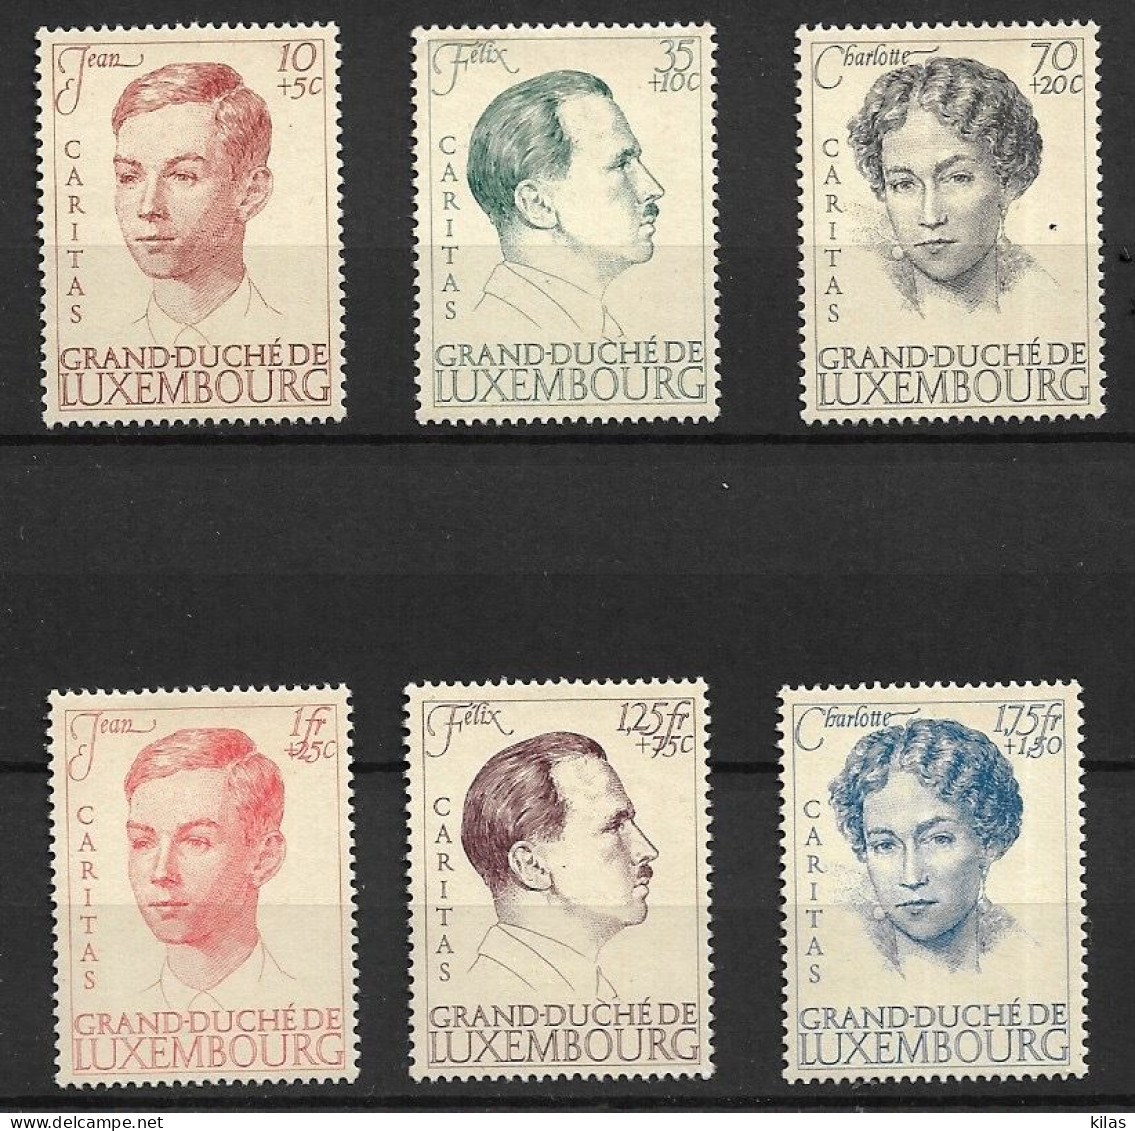 LUXEMBOURG 1939 20TH ANNIVERSARY OF THE REIGN OF THE GRAND DUCHESS CHARLOTTE MNH - 1948-58 Charlotte Left-hand Side